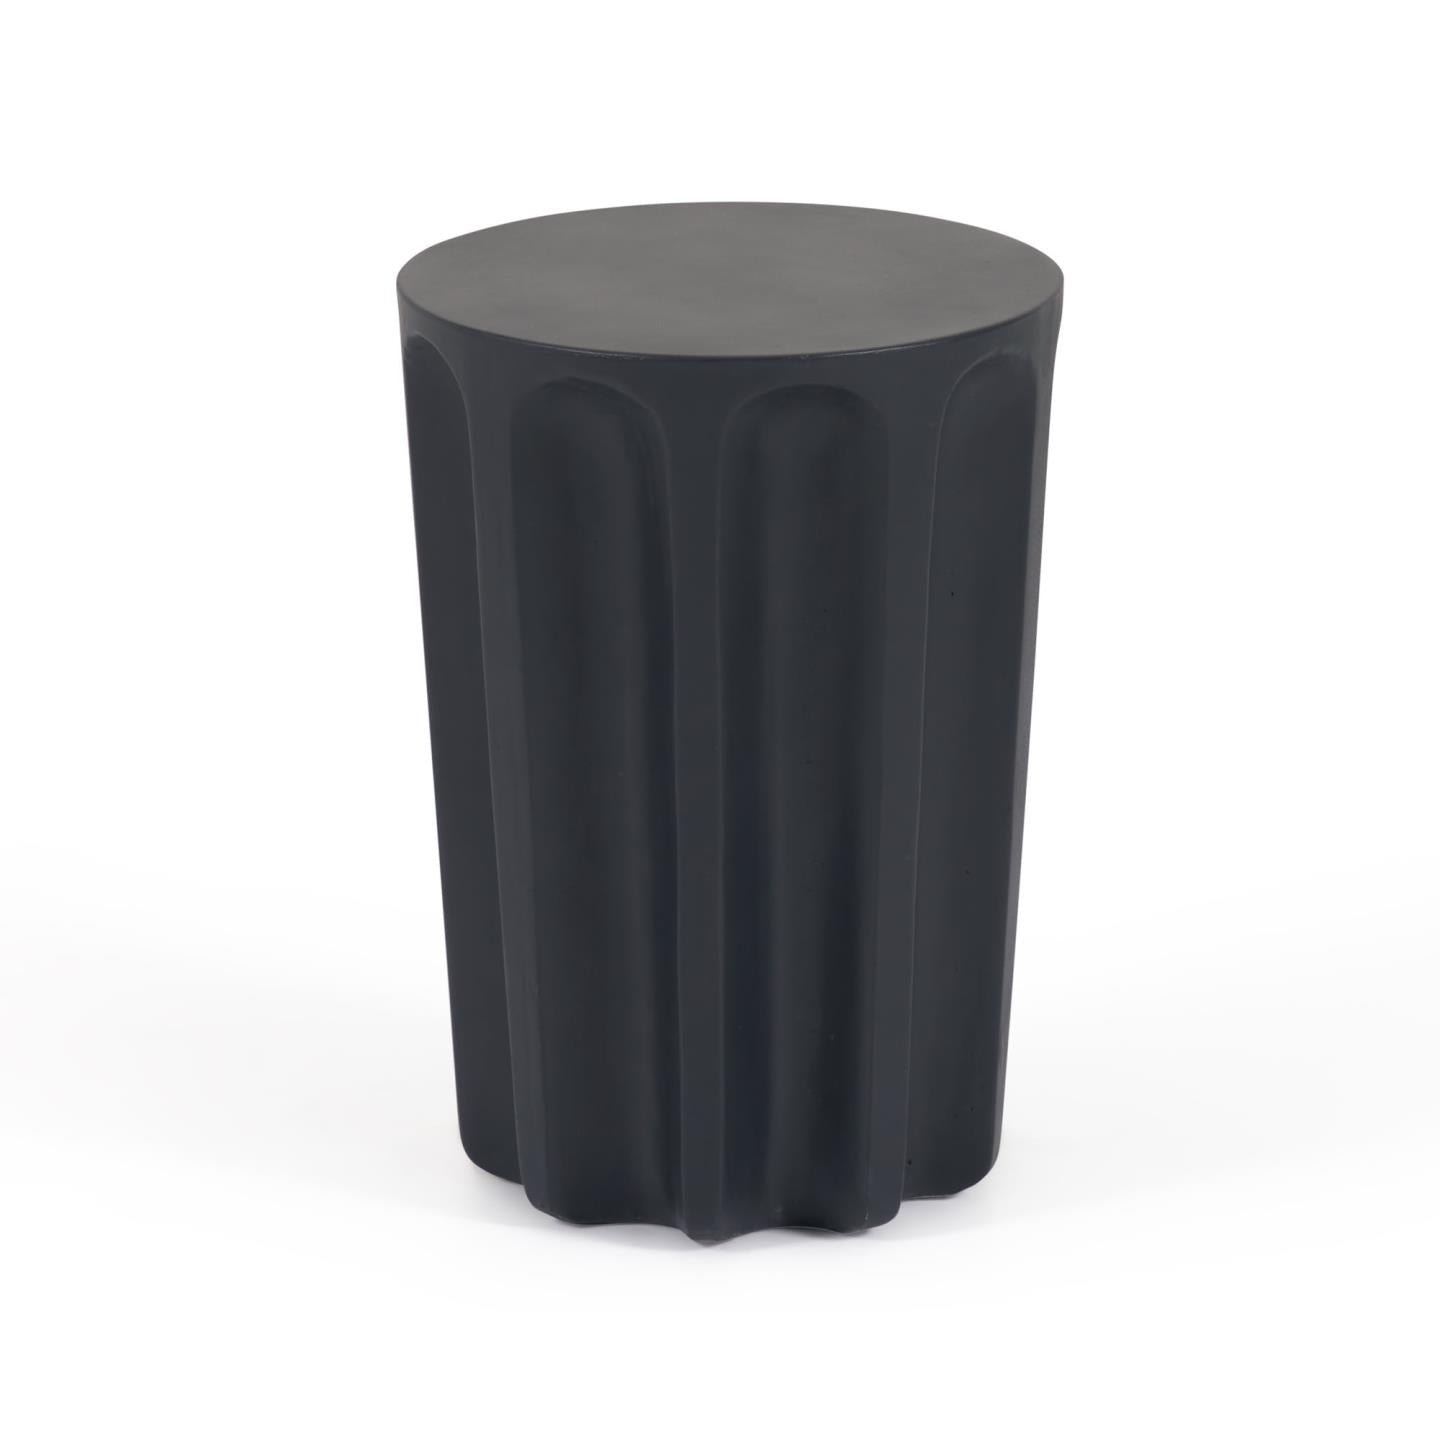 Vilandra round outdoor side table made of concrete with black finish Ø 32 cm